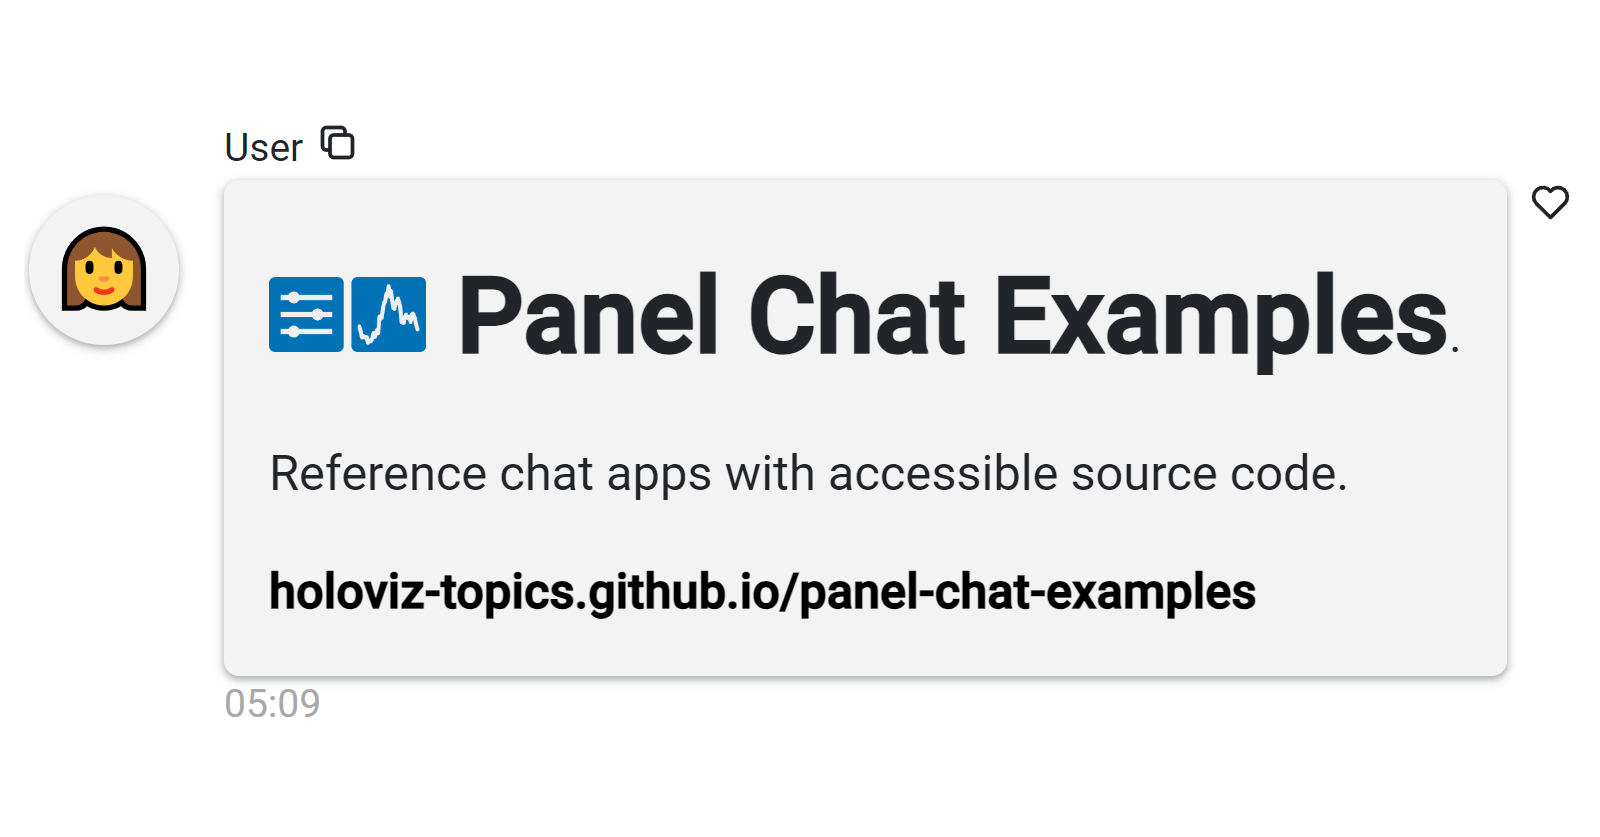 panel-chat-examples-card-1600x800